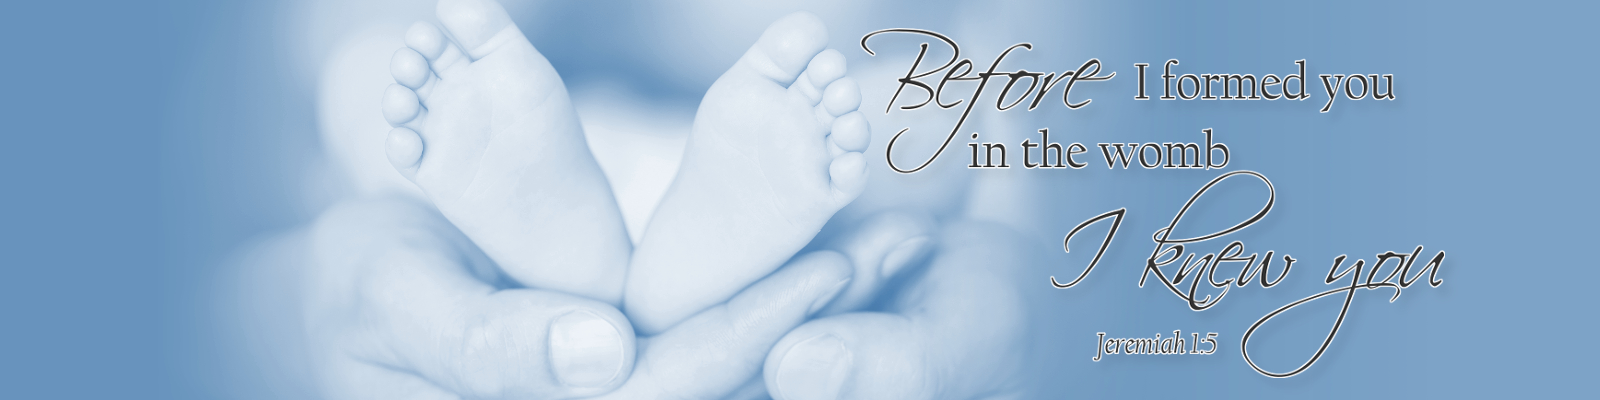 Before I formed you in the womb, I knew You. Iowa Pro-Life Action